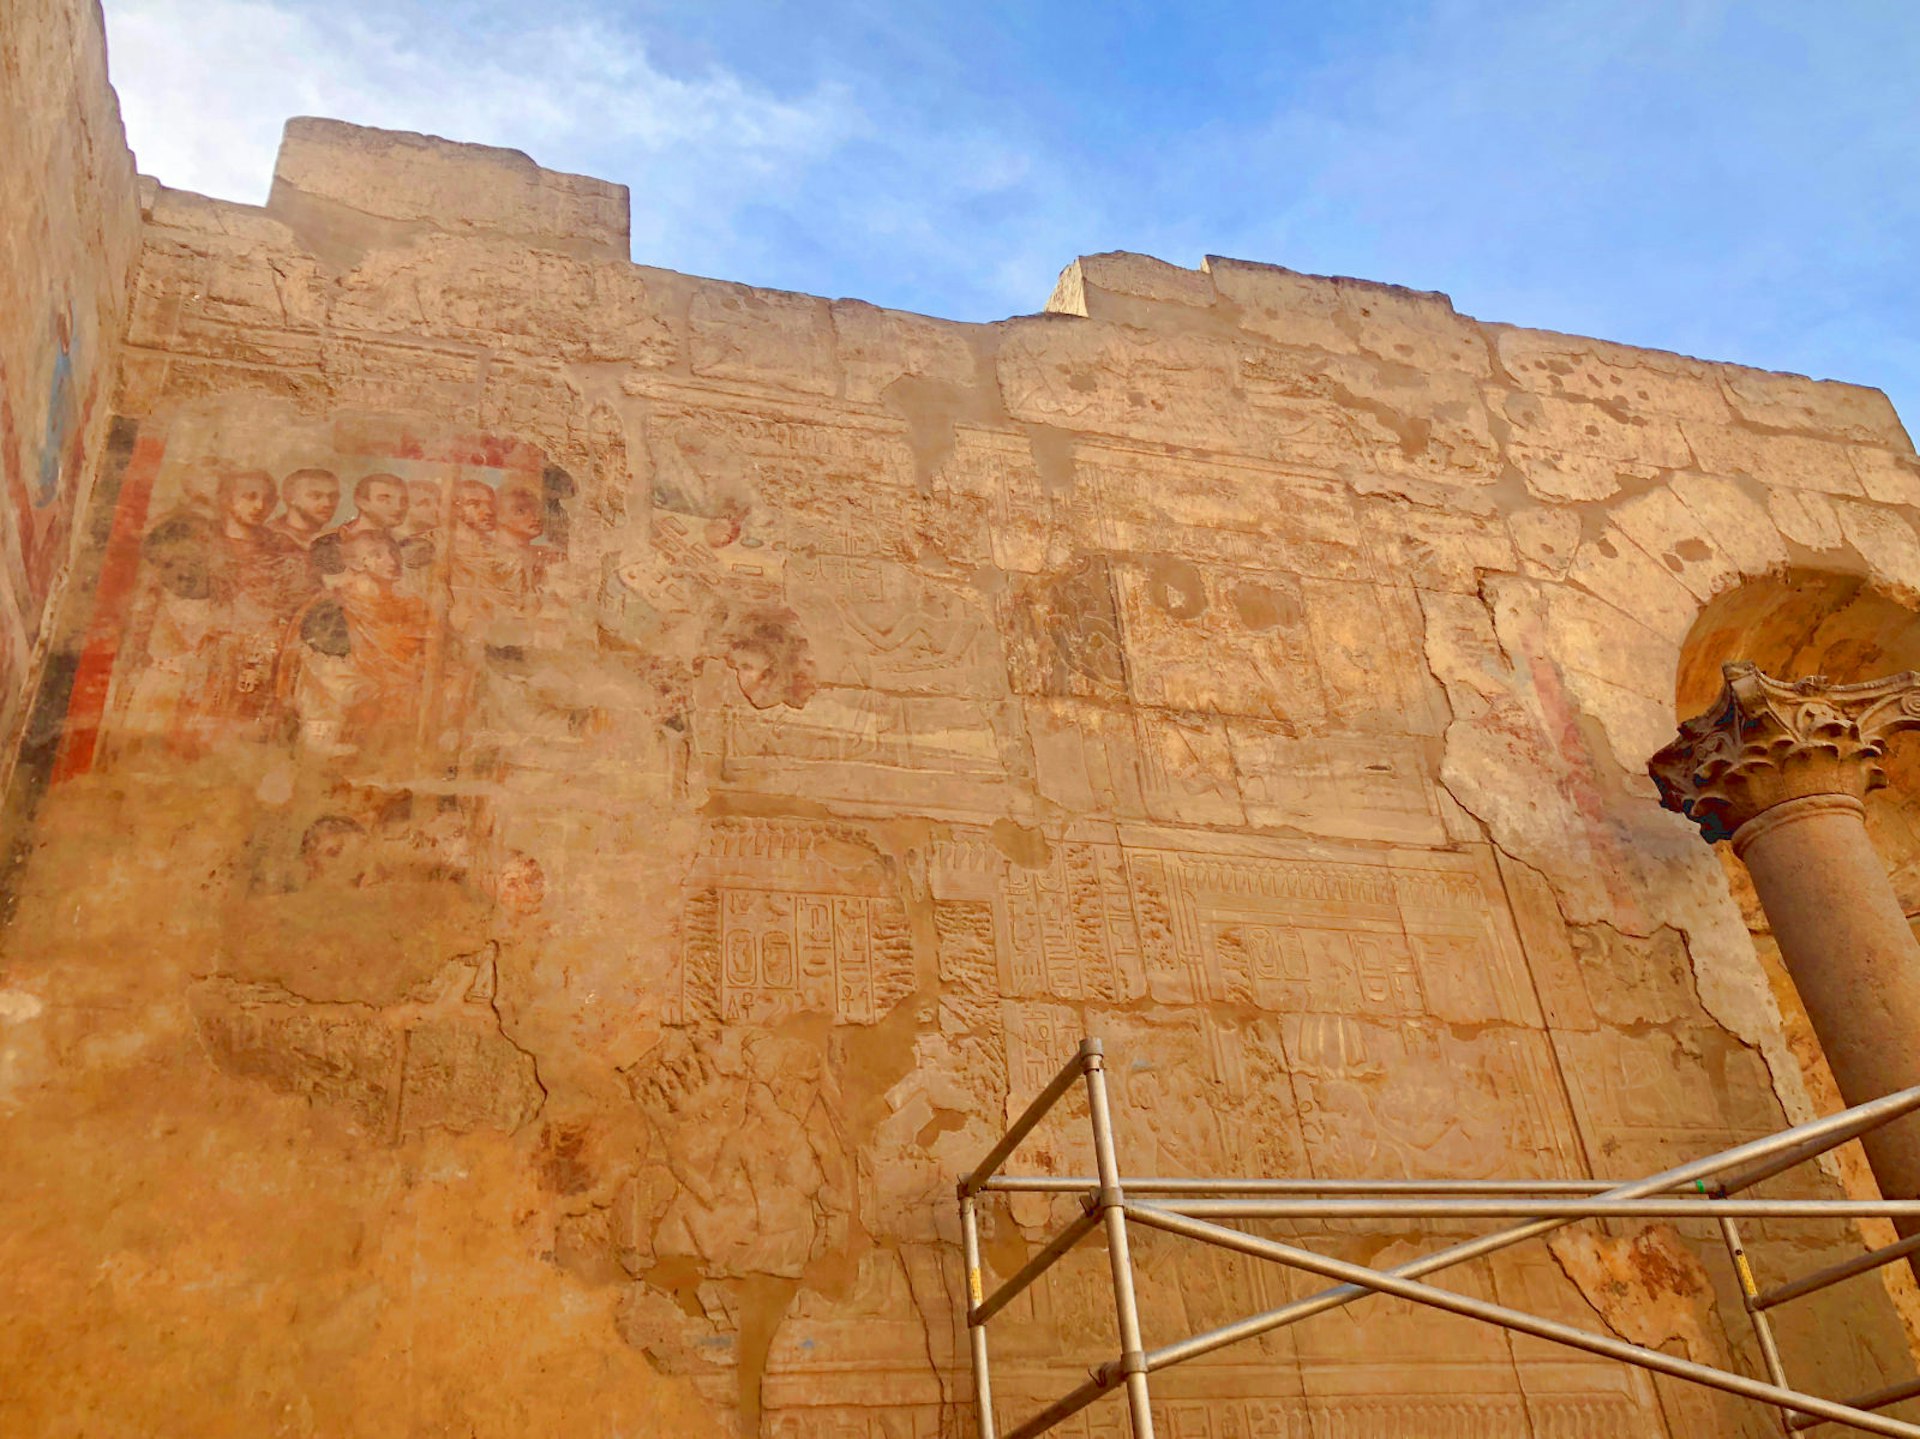 Painting from the early Christian era on the wall of Luxor Temple. Image by Lauren Keith / Lonely Planet